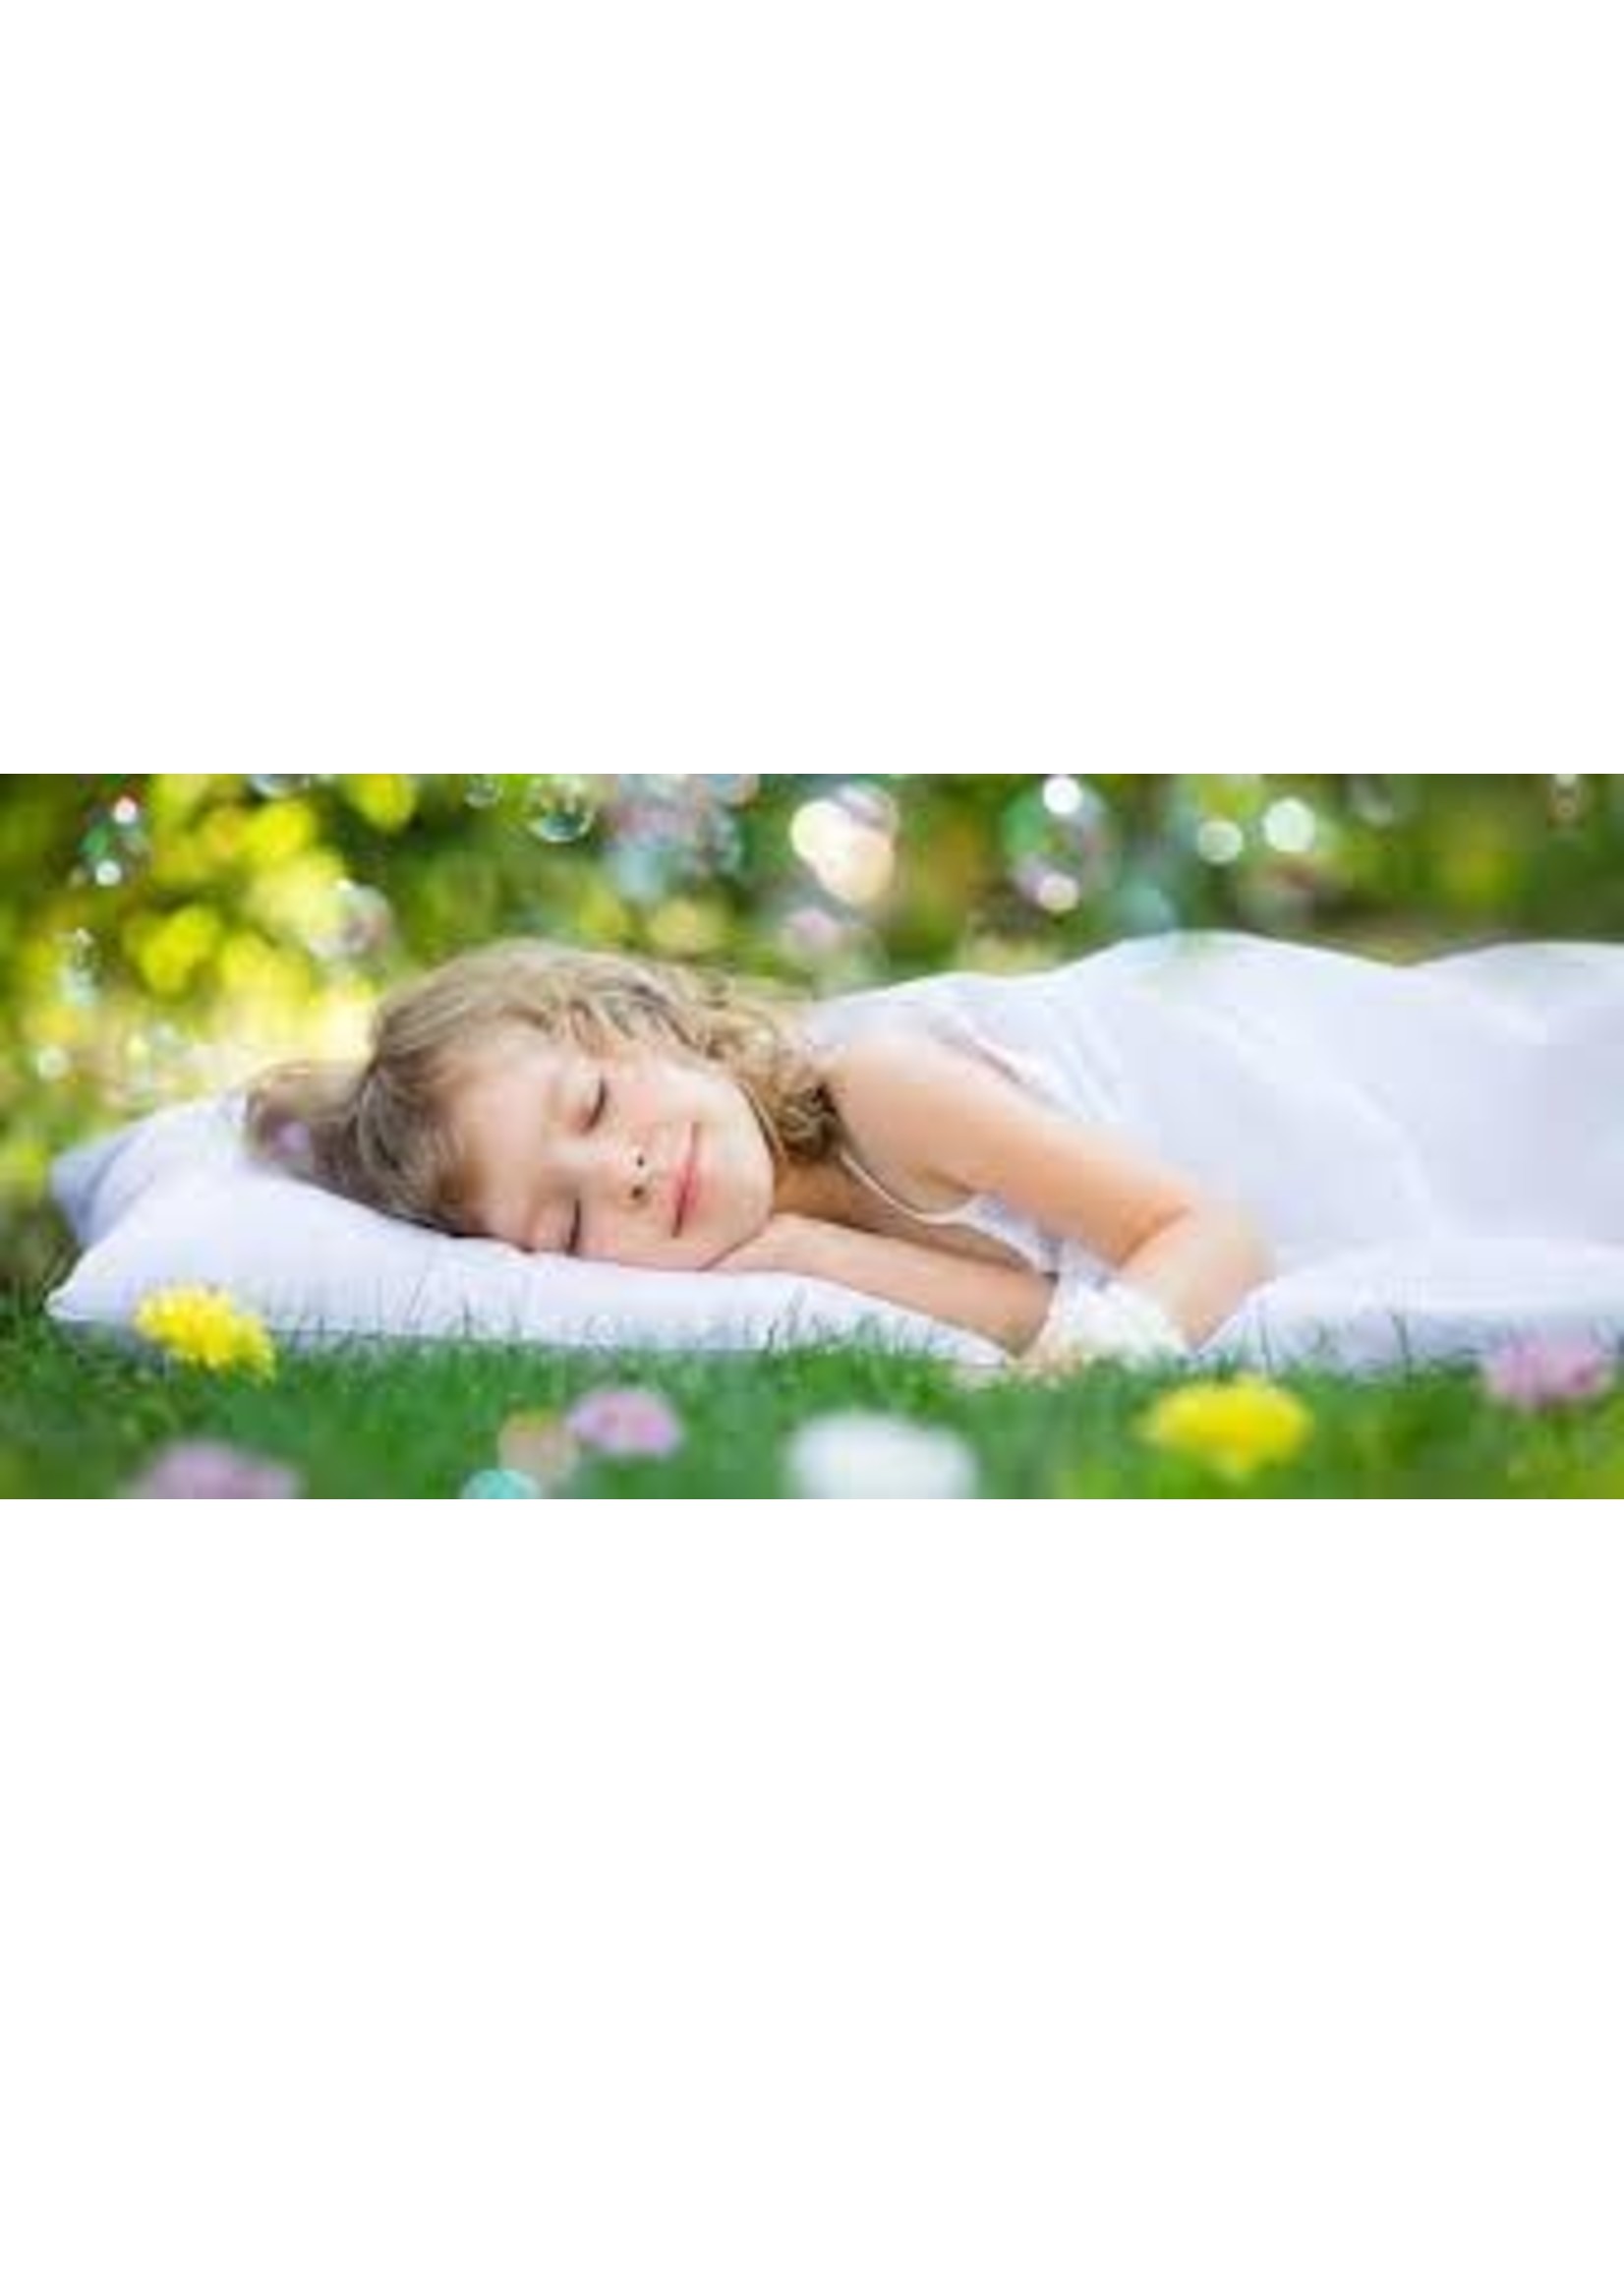 Energy treatment for children (0 to 16 years old) IN PERSON or DISTANCE